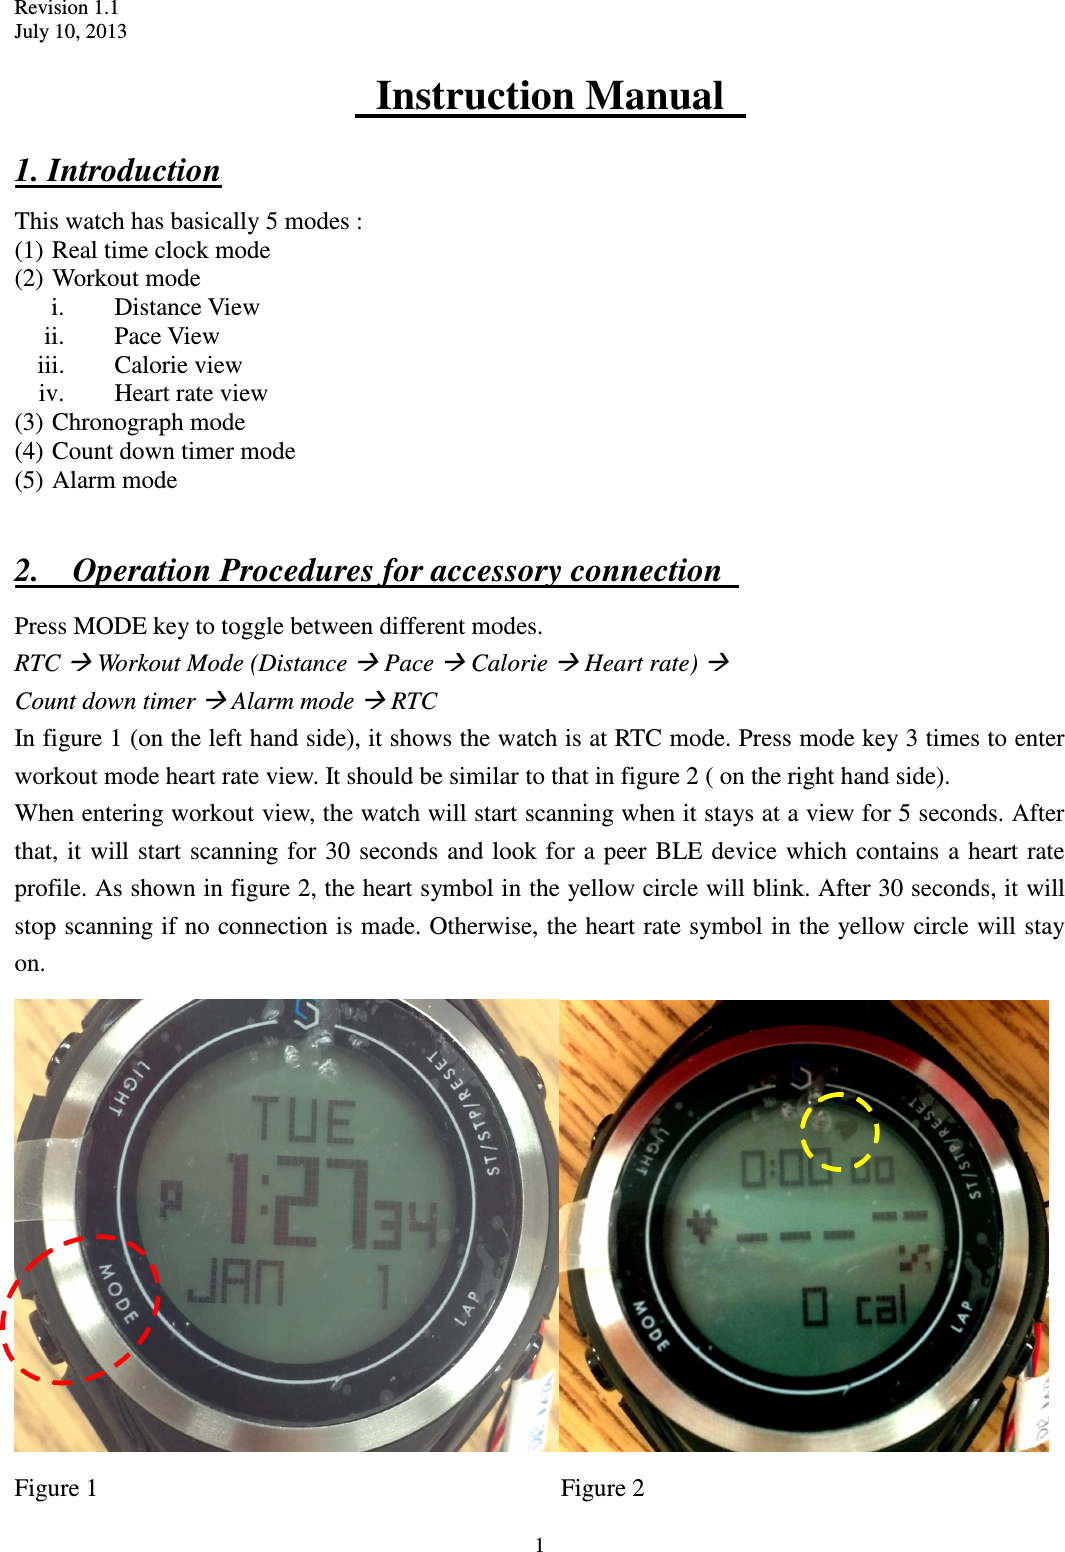 Revision 1.1 July 10, 2013  1   Instruction Manual   1. Introduction This watch has basically 5 modes : (1) Real time clock mode (2) Workout mode   i. Distance View ii. Pace View iii. Calorie view iv. Heart rate view (3) Chronograph mode (4) Count down timer mode (5) Alarm mode  2.    Operation Procedures for accessory connection   Press MODE key to toggle between different modes. RTC  Workout Mode (Distance  Pace  Calorie  Heart rate)    Count down timer  Alarm mode  RTC In figure 1 (on the left hand side), it shows the watch is at RTC mode. Press mode key 3 times to enter workout mode heart rate view. It should be similar to that in figure 2 ( on the right hand side). When entering workout view, the watch will start scanning when it stays at a view for 5 seconds. After that, it  will start scanning for 30 seconds and look for a peer BLE device  which  contains a heart rate profile. As shown in figure 2, the heart symbol in the yellow circle will blink. After 30 seconds, it will stop scanning if no connection is made. Otherwise, the heart rate symbol in the yellow circle will stay on.  Figure 1                                                                          Figure 2 